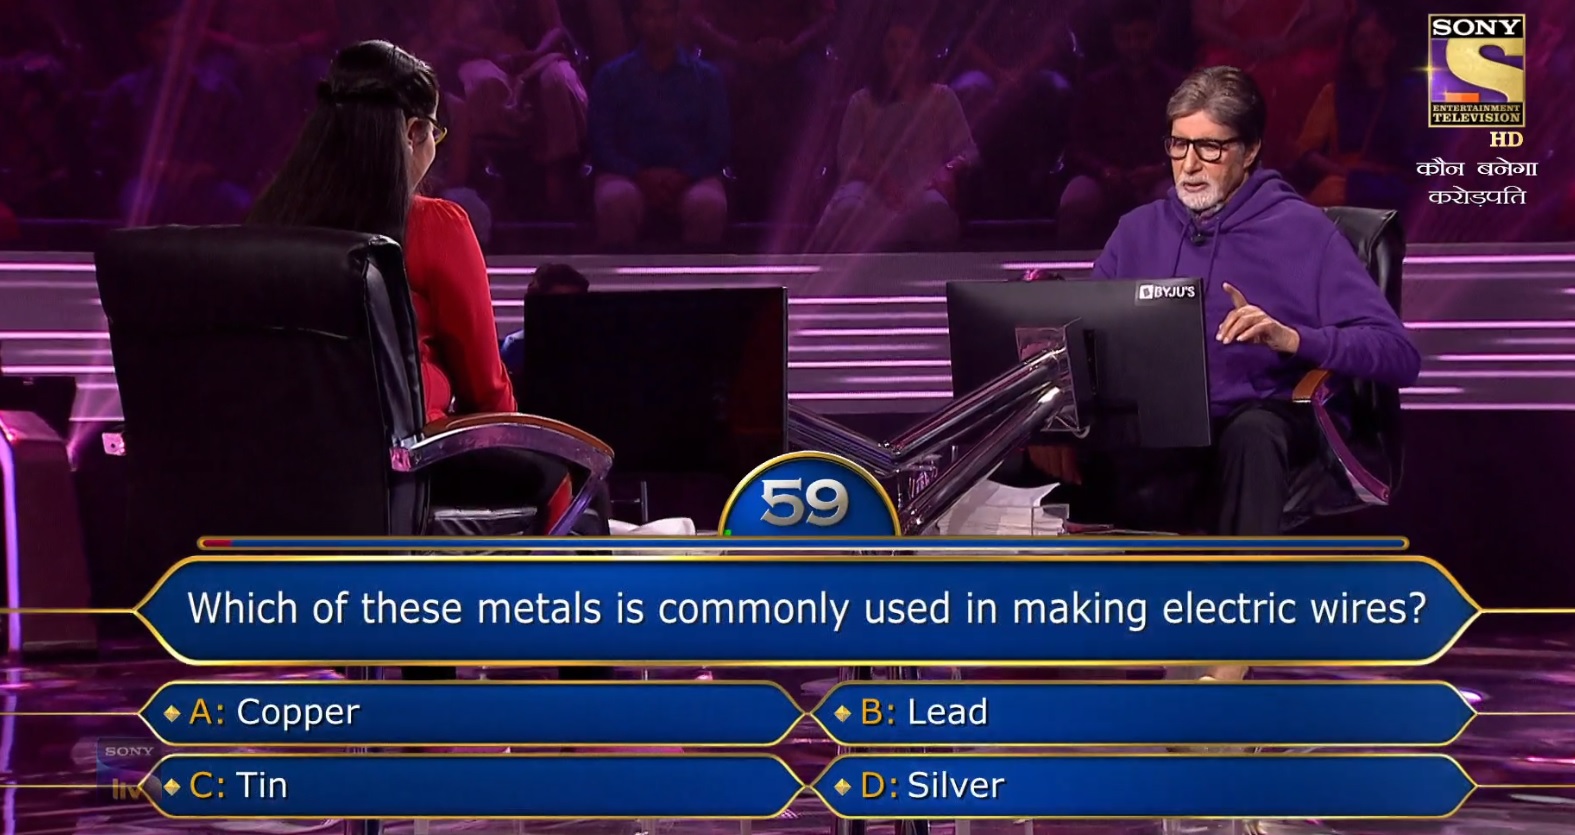 Ques : Which of these metals is commonly used in making electric wires?